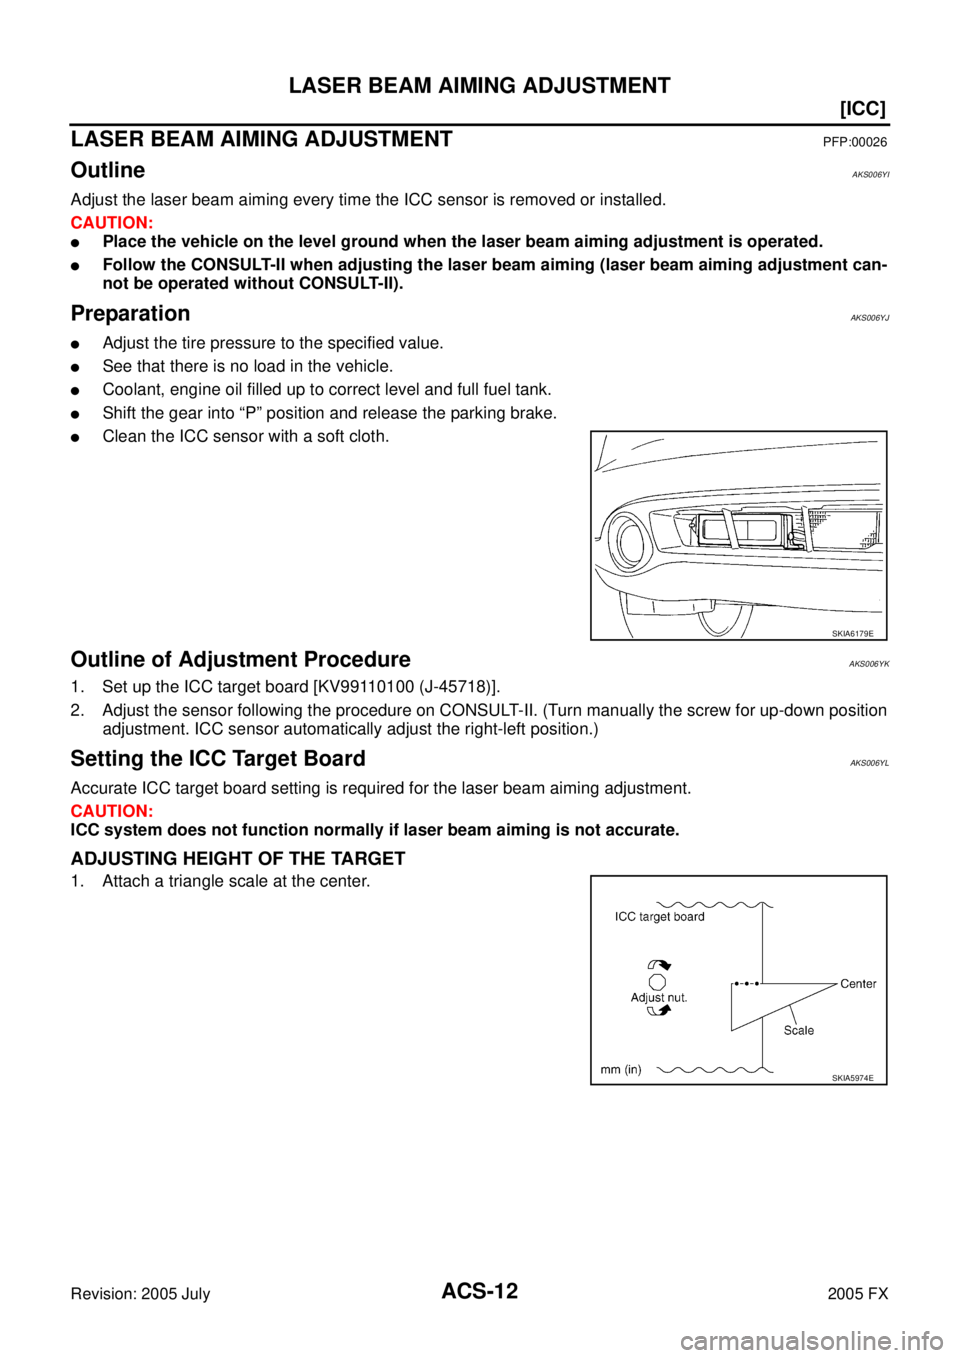 INFINITI FX35 2005  Service Manual ACS-12
[ICC]
LASER BEAM AIMING ADJUSTMENT
Revision: 2005 July 2005 FX
LASER BEAM AIMING ADJUSTMENTPFP:00026
OutlineAKS006YI
Adjust the laser beam aiming every time the ICC sensor is removed or install